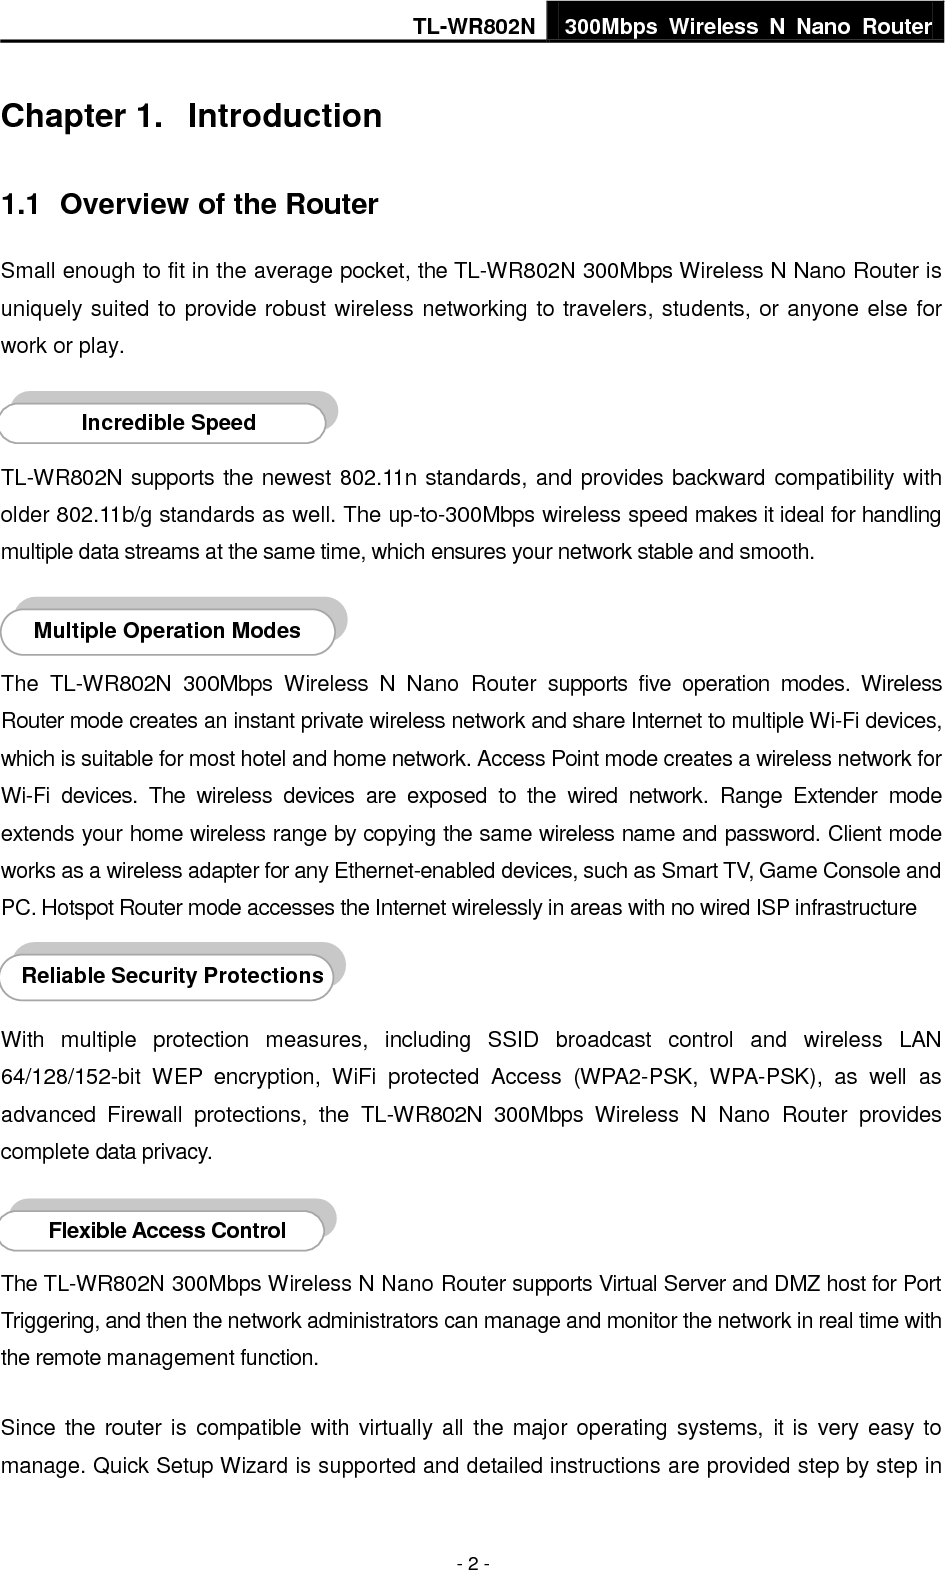 TL-WR802N 300Mbps  Wireless  N  Nano  Router  - 3 - this  user  guide.  Before  installing  the  Router,  please  look  through  this  guide  to  know  all  the Router’s functions. 1.2  Conventions The Router or TL-WR802N mentioned in this guide stands for TL-WR802N 300Mbps Wireless N Nano Router without any explanation. Parameters provided  in the pictures are just references for setting up the product, which may differ from the actual situation. You can set the parameters according to your demand. 1.3  Main Features  Complies with IEEE 802.11n/g/b  Wireless speed up to 300Mbps  Powered by external power adapter or USB connection to computer  Travel size design, ideal for home or travel use  Compact and portable, powerful wireless signal as well  Perfectly compatible with almost all the 2.4GHz Wi-Fi devices  Supports AP, Router, Range Extender, Bridge, and Client modes  Supports WEP, WPA/WPA2, WPA-PSK/WPA2-PSK encryptions 1.4  Panel Layout   Figure 1-1 TL-WR802N sketch 